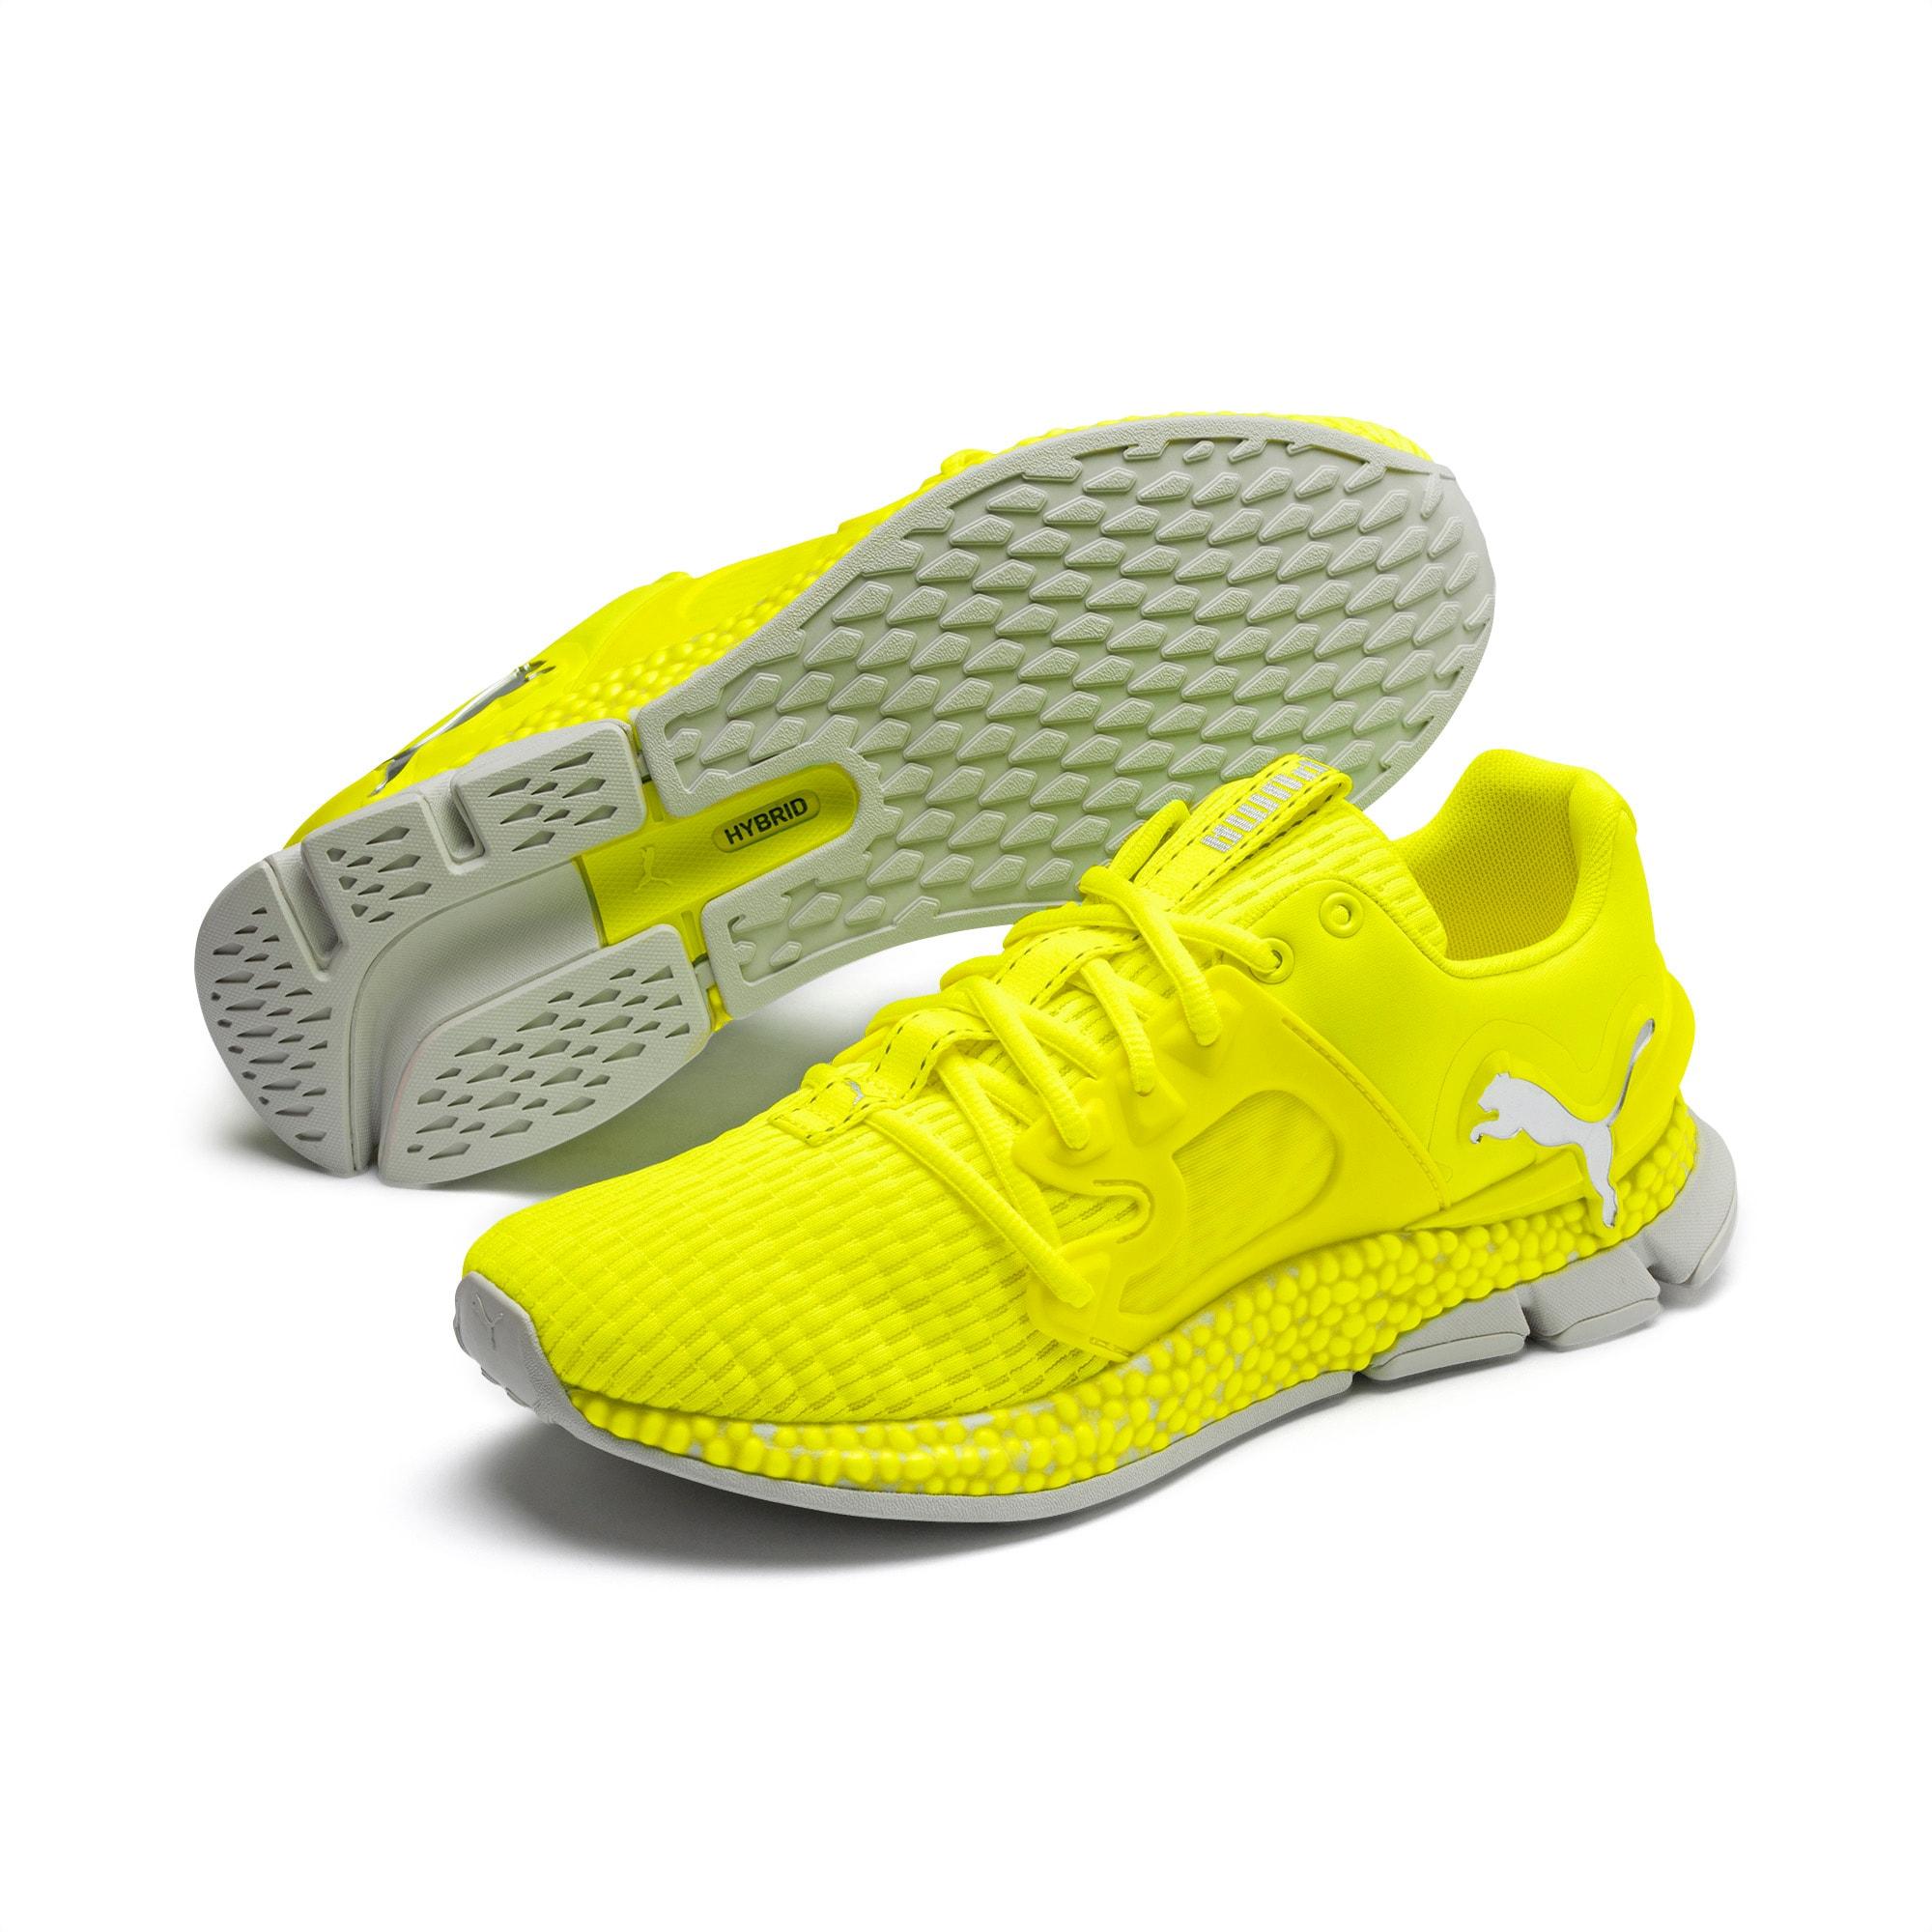 PUMA Rubber Hybrid Sky Lights Men's Running Shoes in Yellow for Men - Lyst